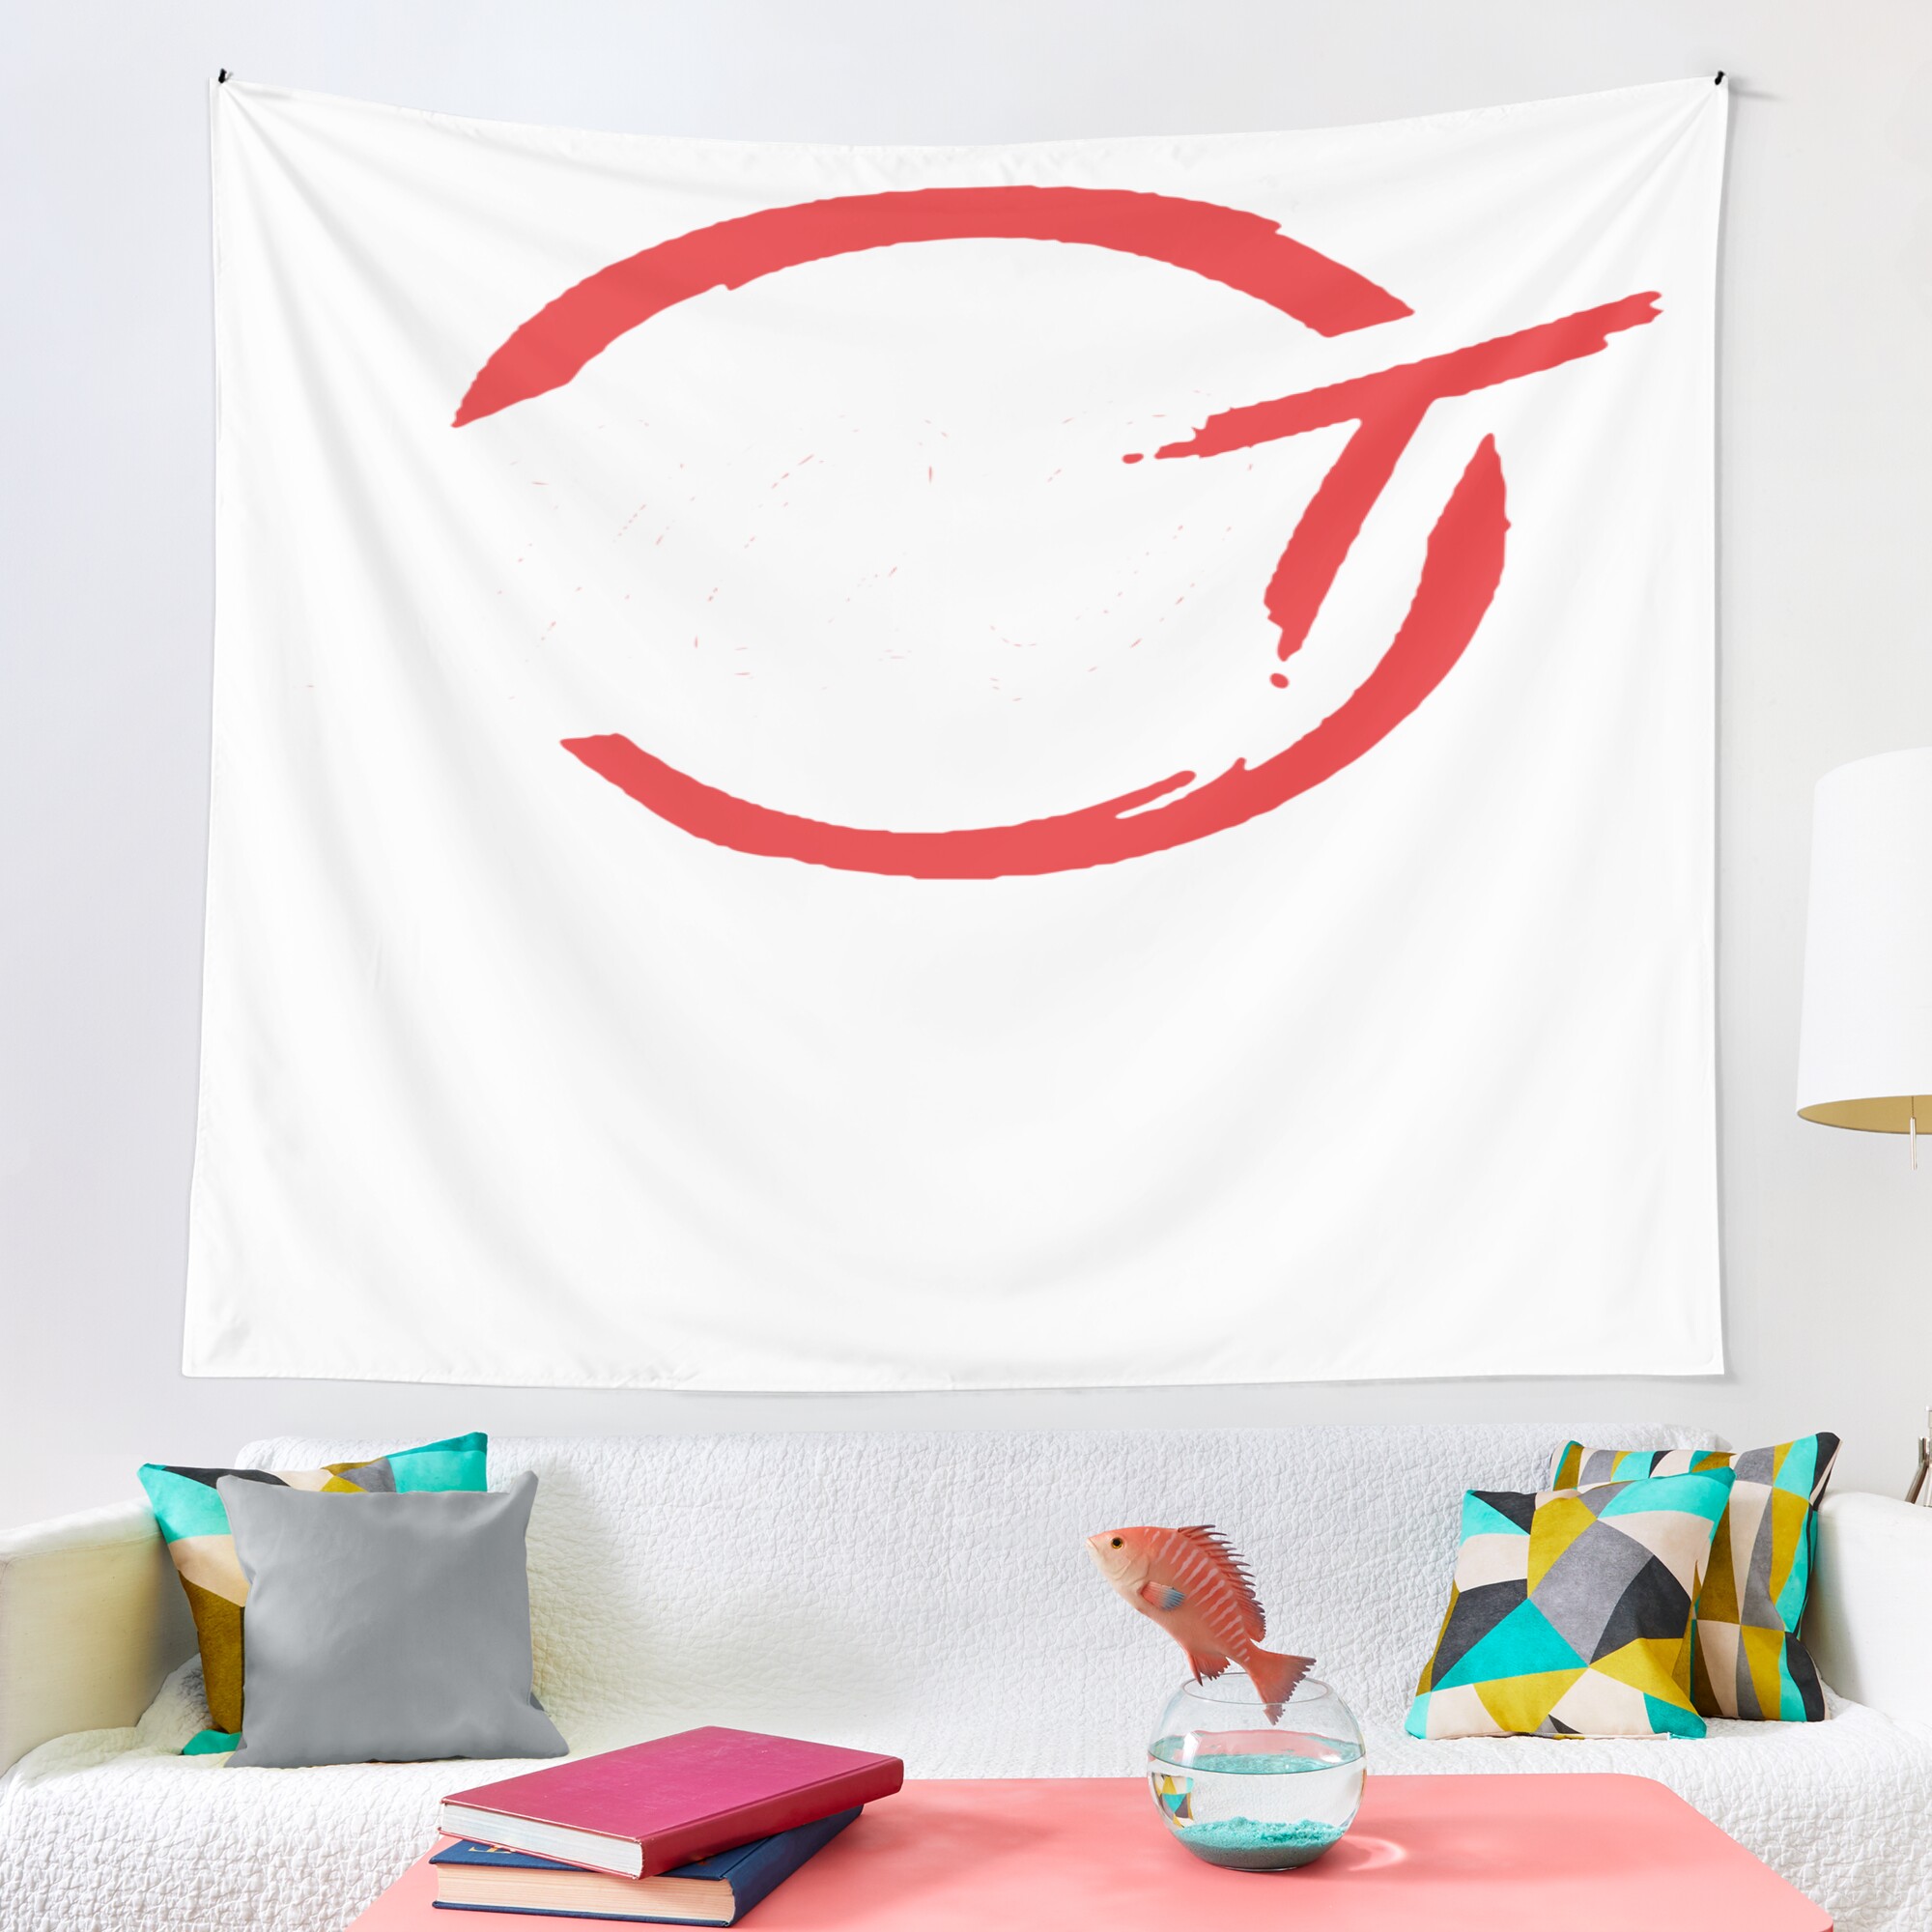 urtapestry lifestyle largesquare2000x2000 9 - 100 Thieves Shop